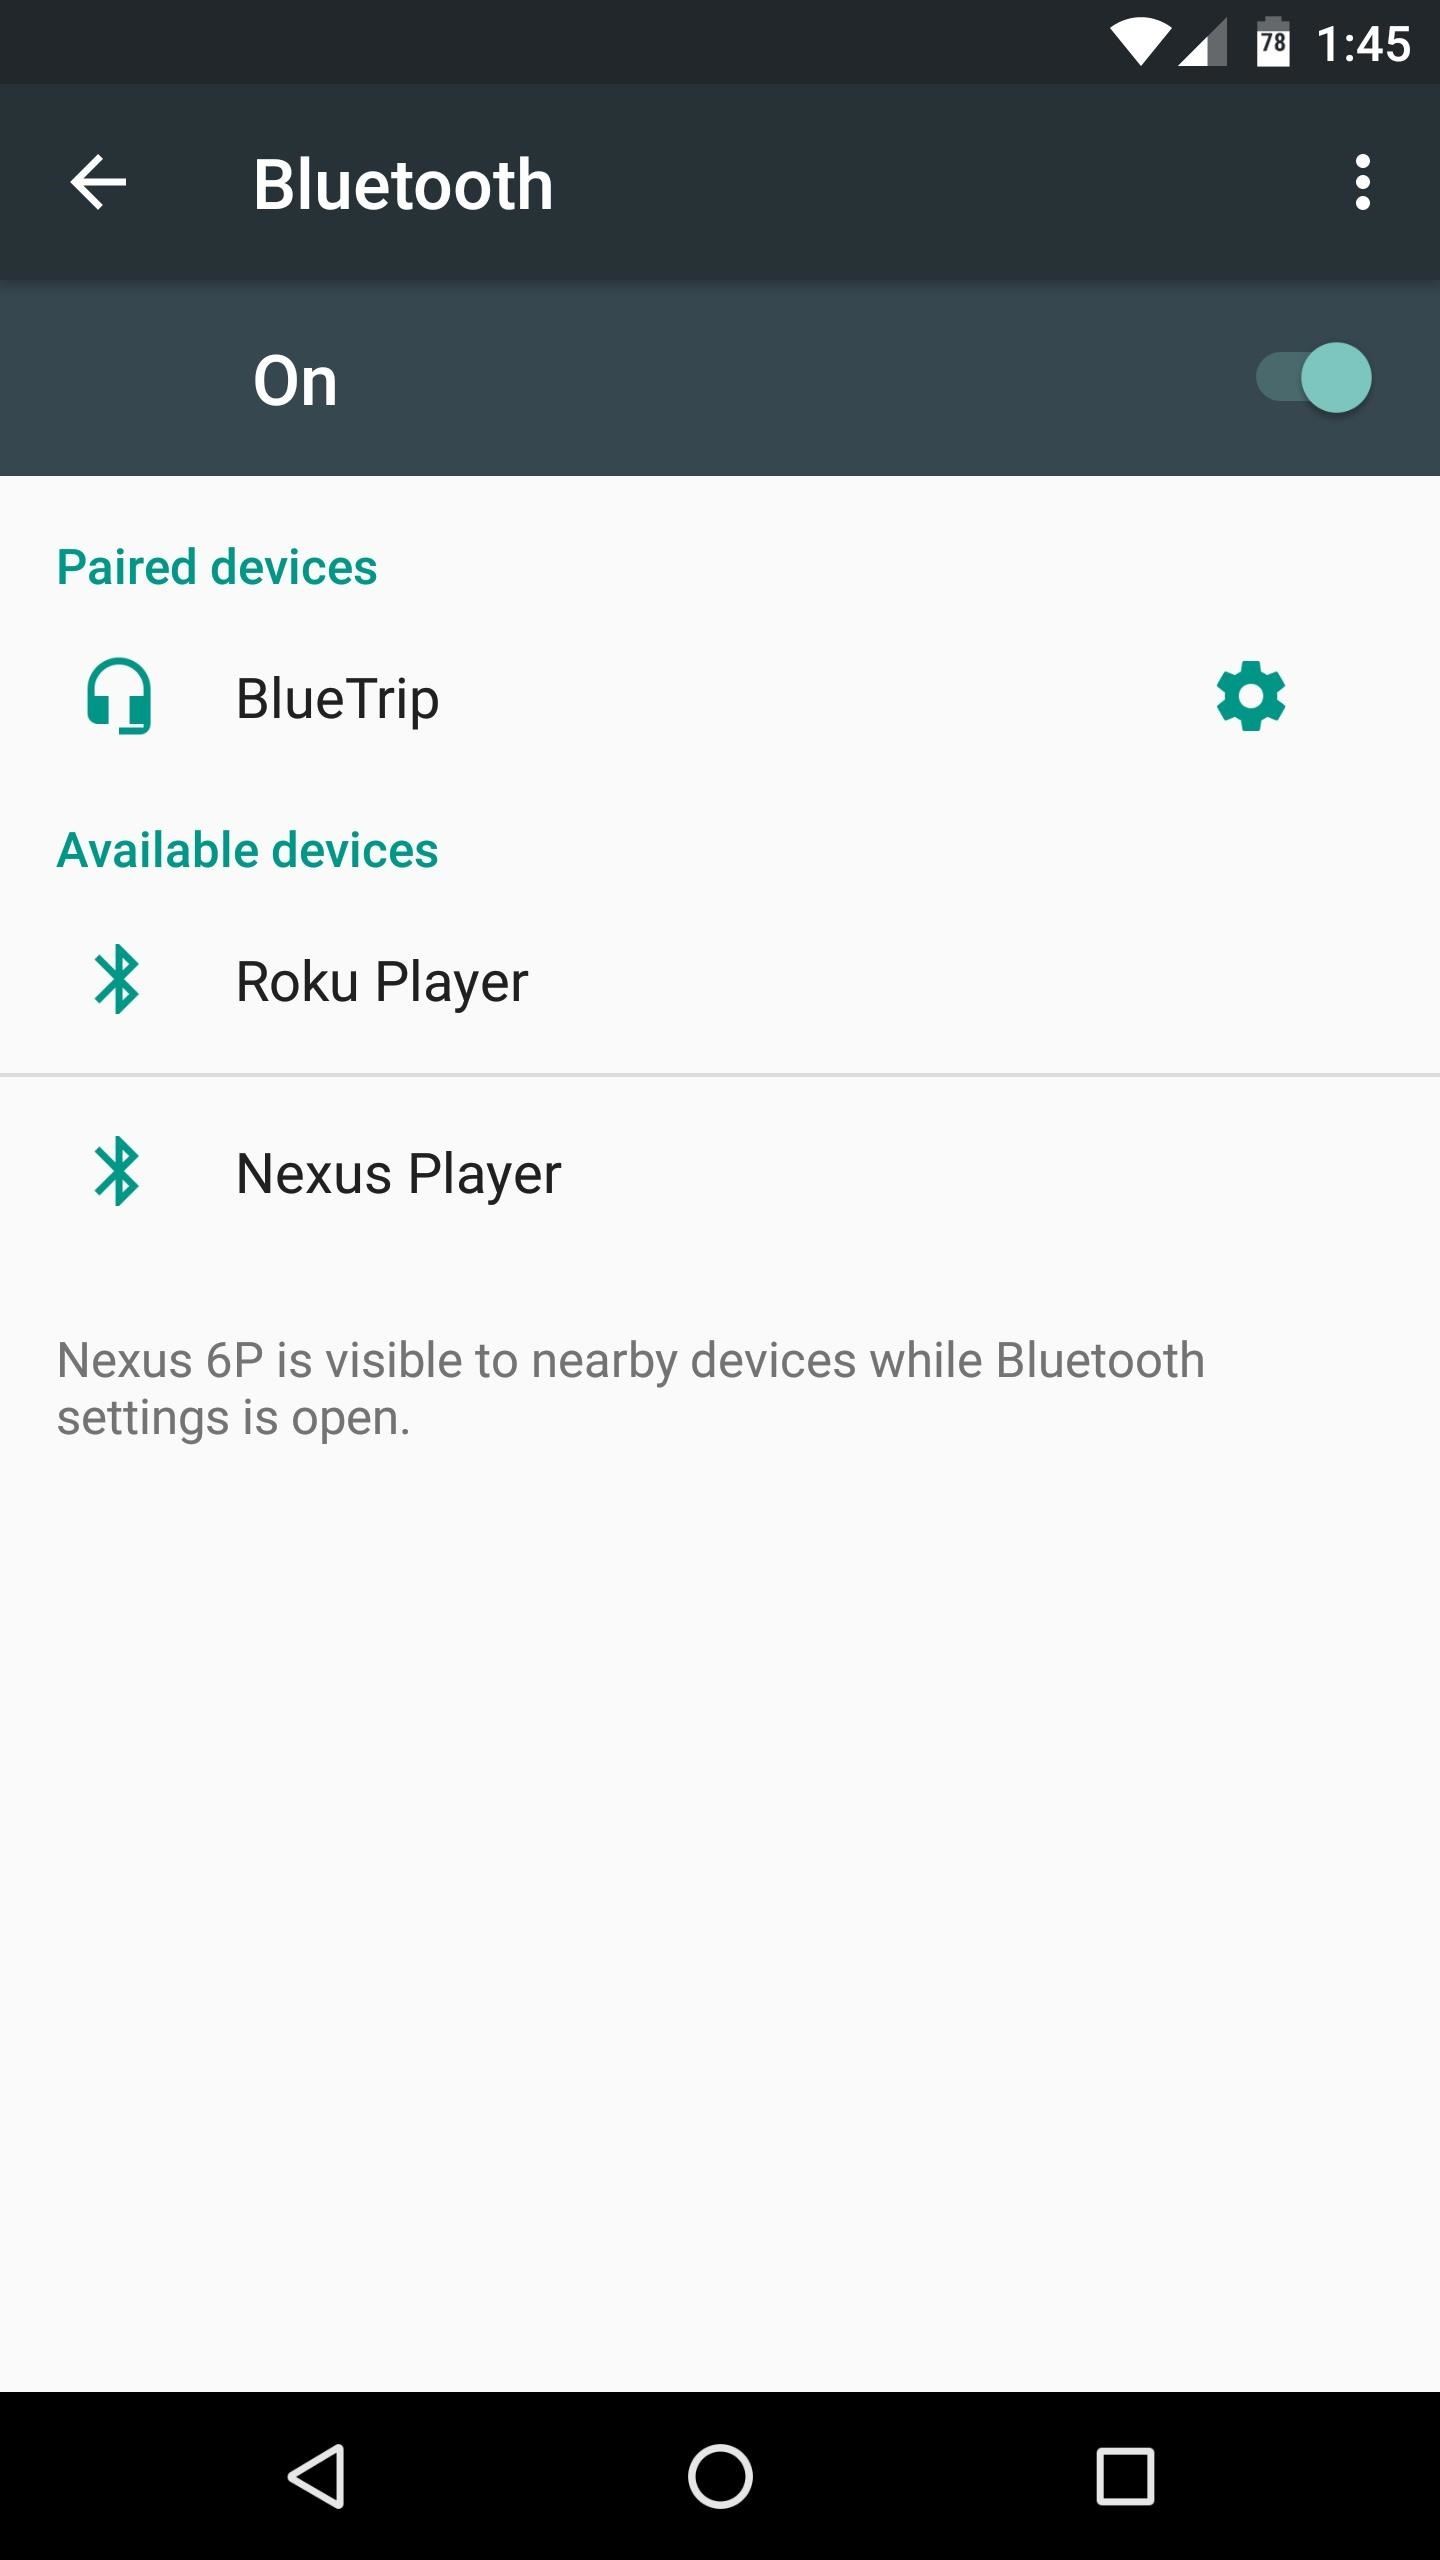 PAIRS Is the Easy Way to Restore Wi-Fi & Bluetooth Connections After Wiping Your Phone